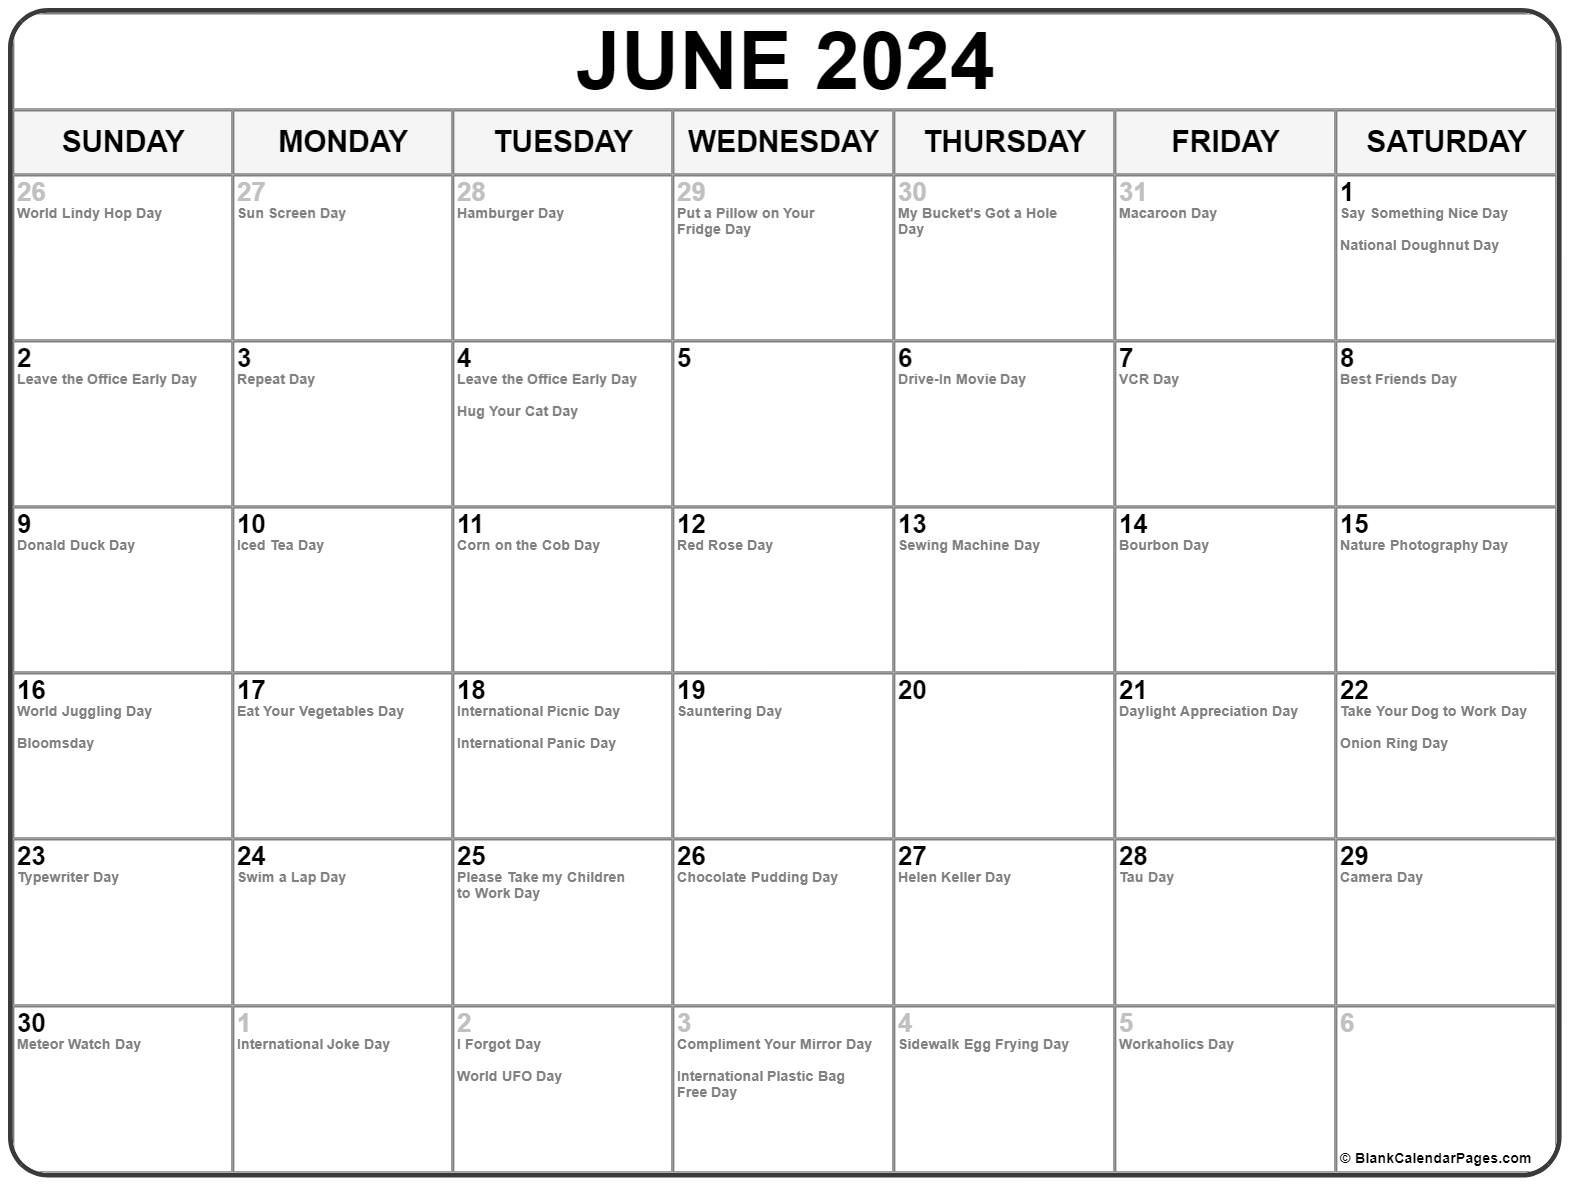 June 2024 With Holidays Calendar intended for National Day Calendar June 2024